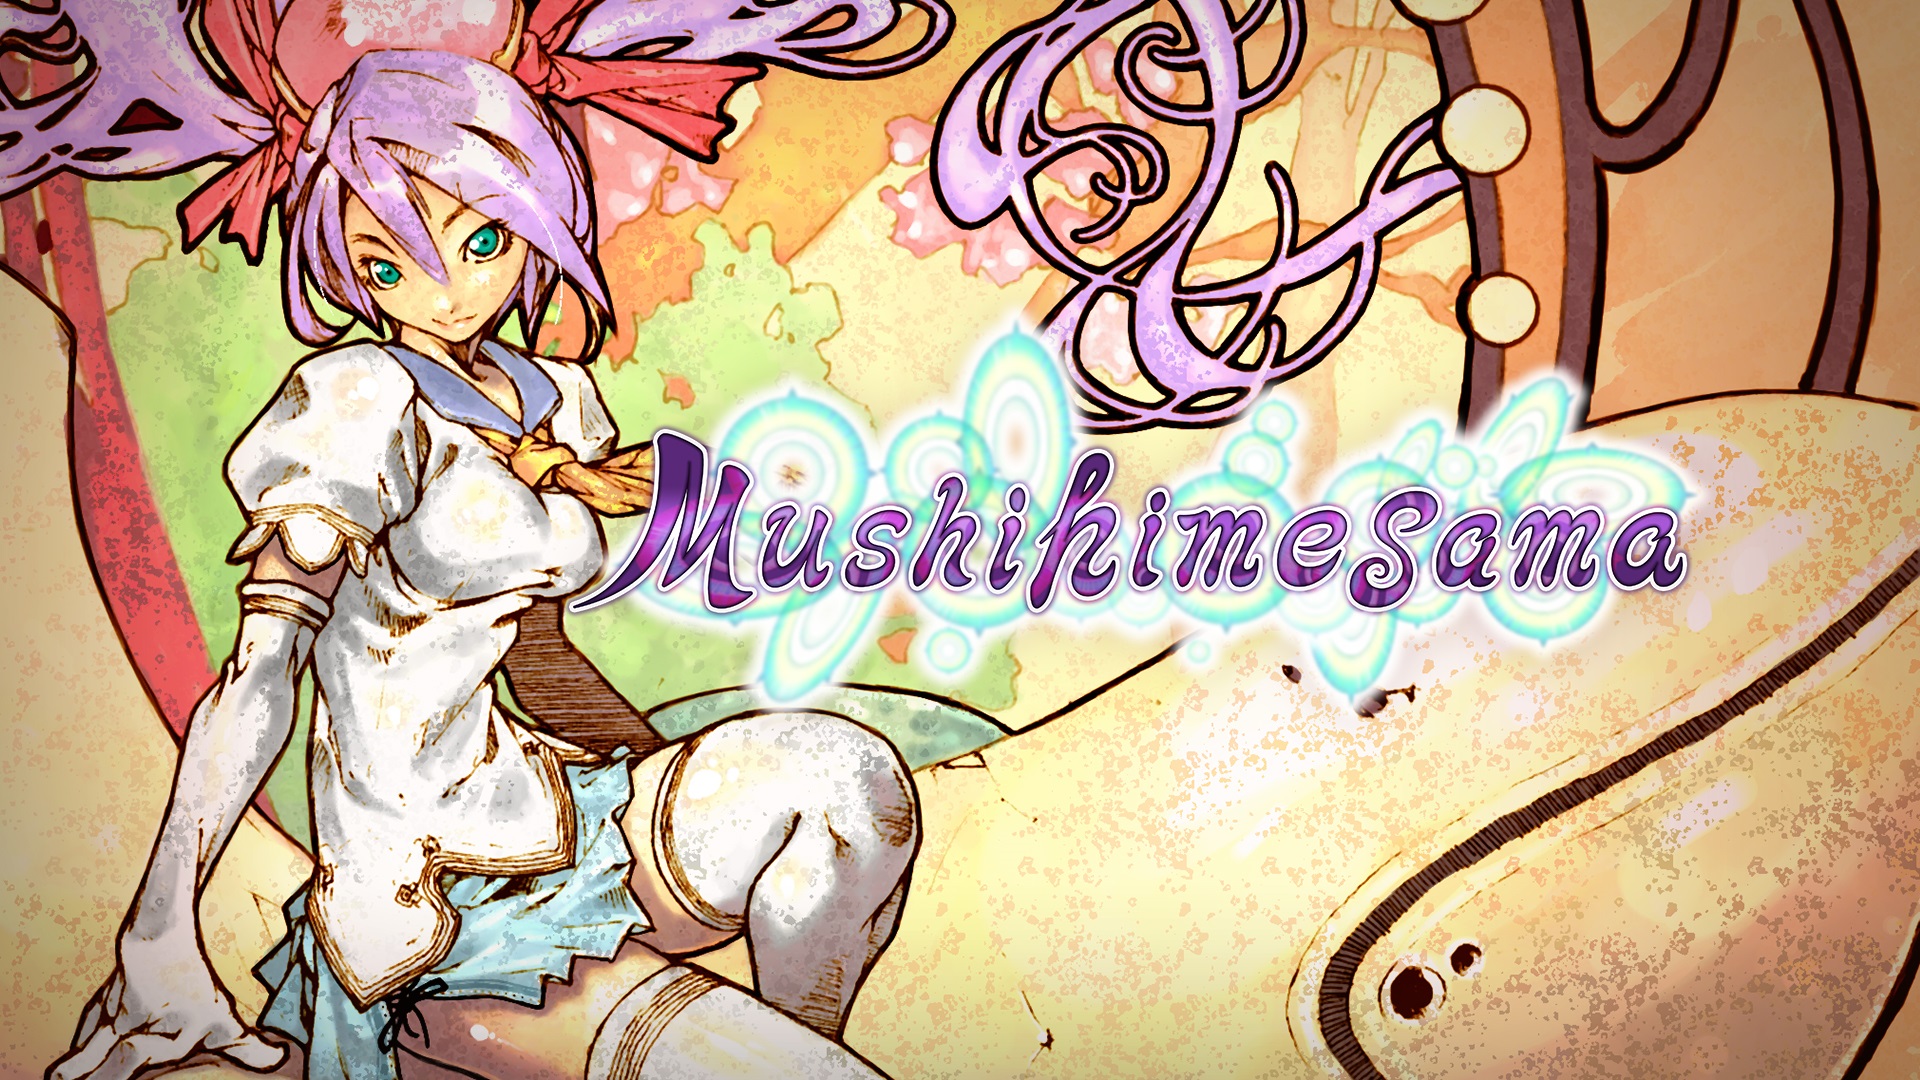 Mushihimesama Switch Port is Now Available; Espgaluda II and DoDonPachi Resurrection Coming in 2021